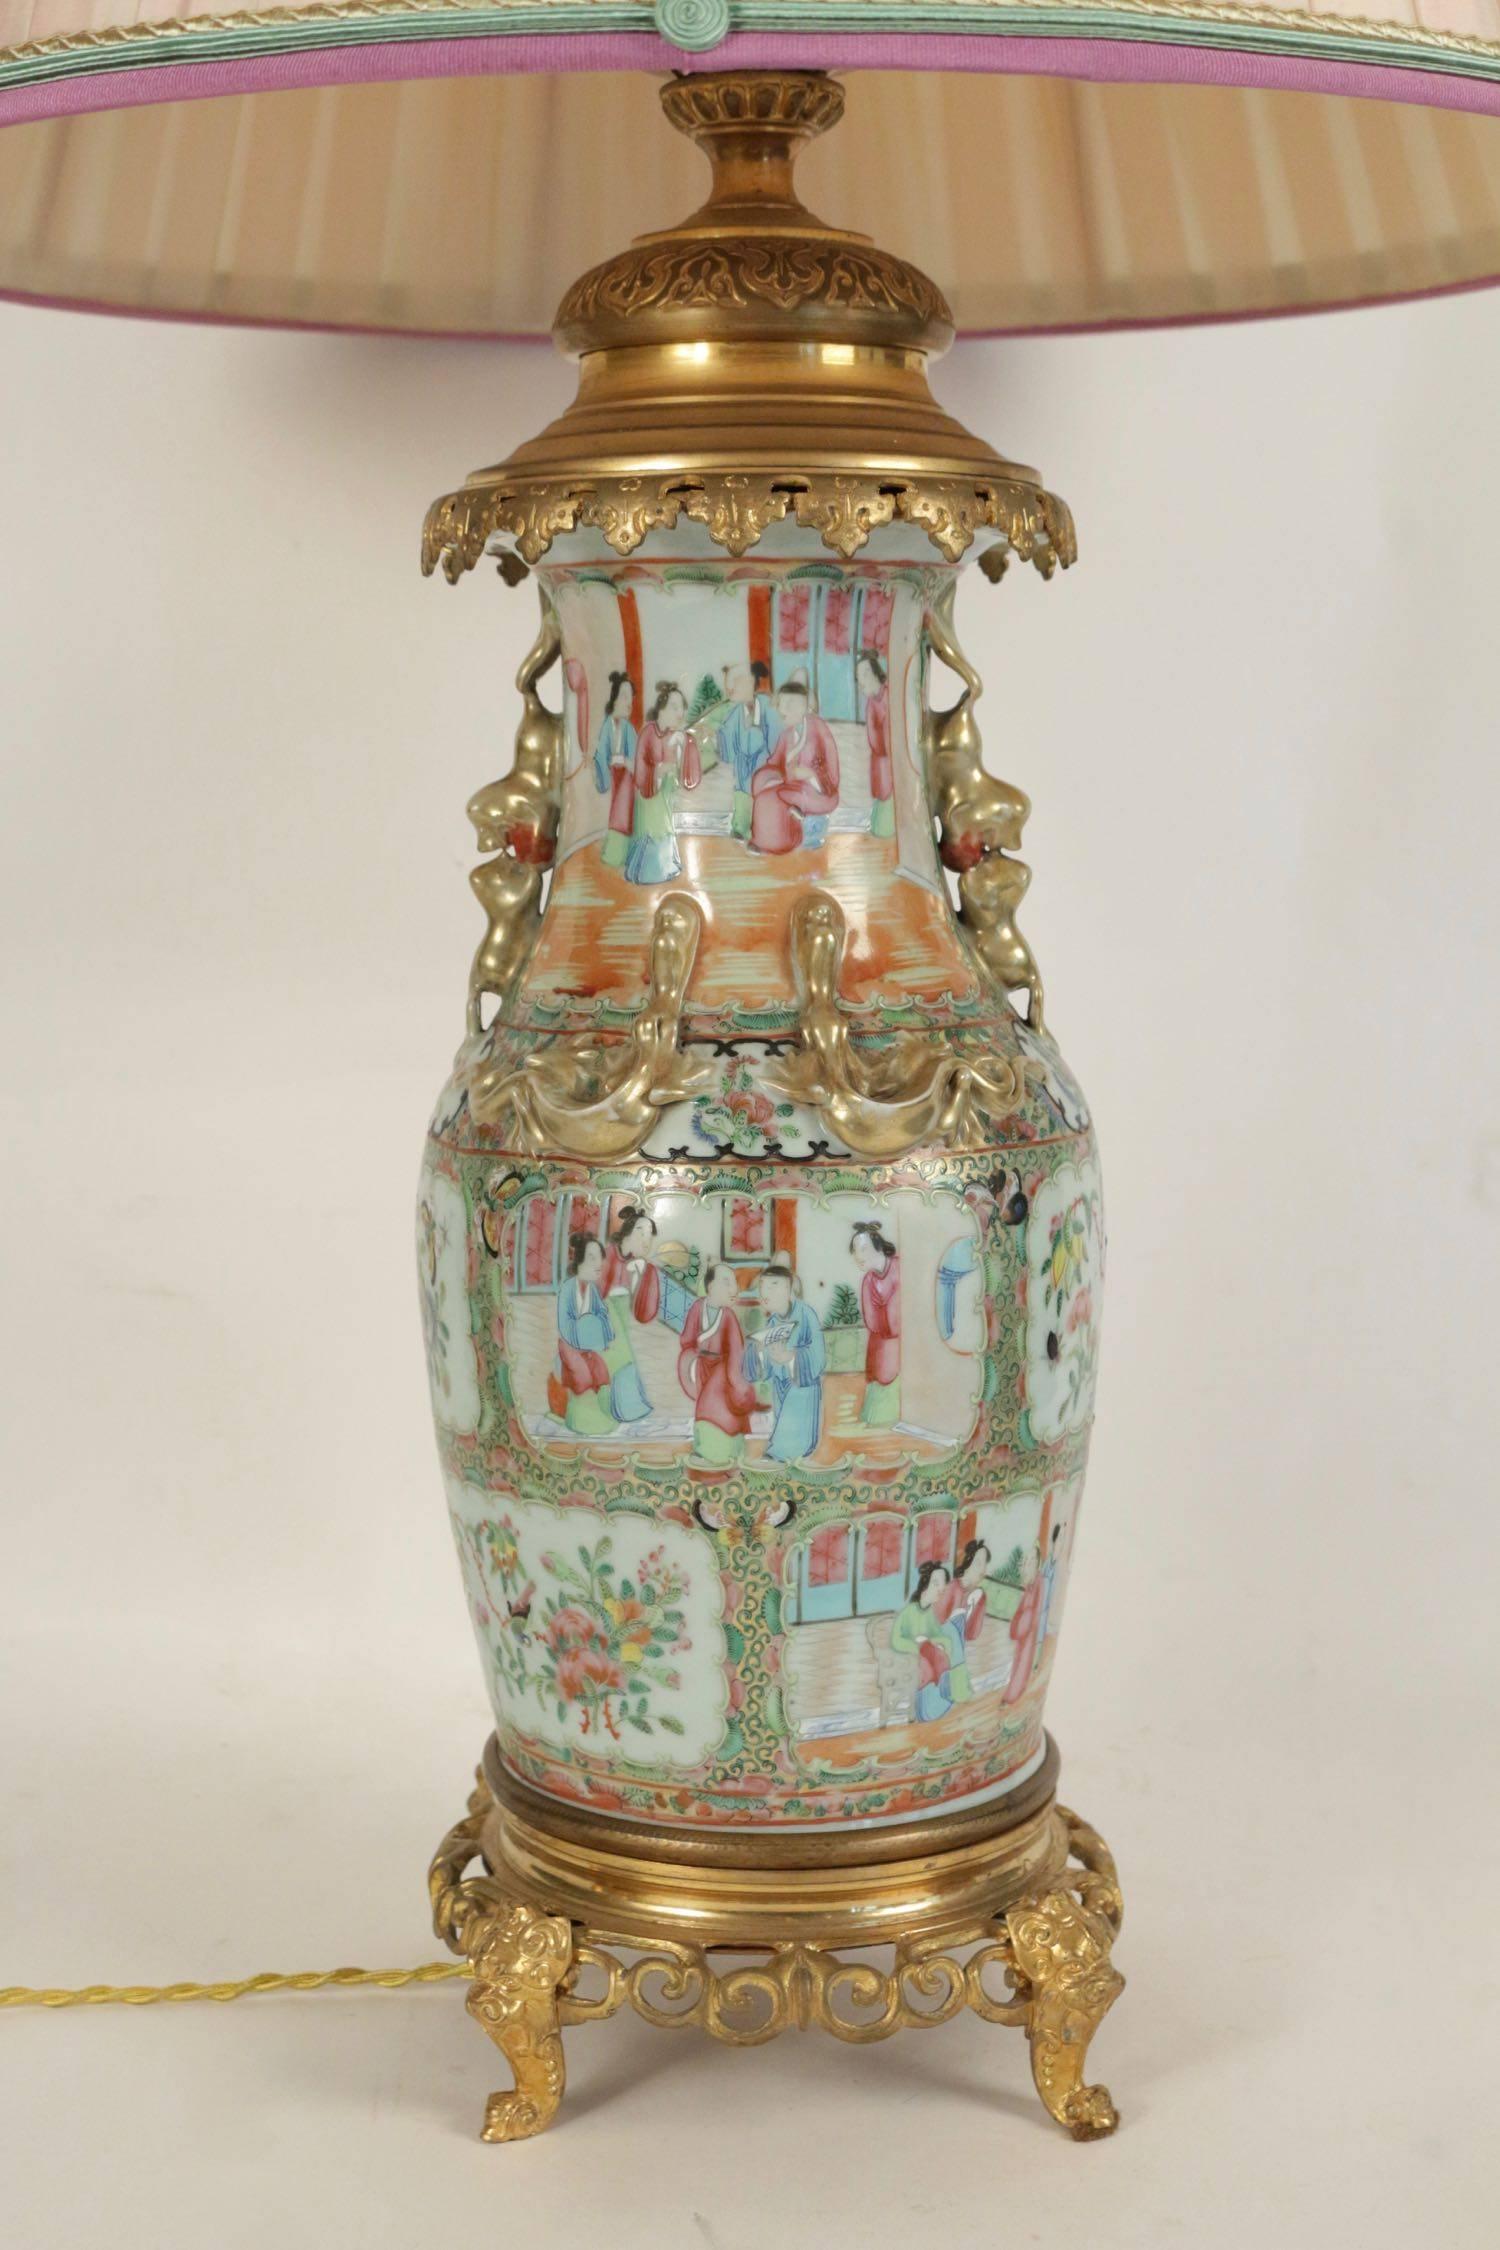 Chinese porcelain lampe from the 19th century mounted on gold gilt bronze base decorated with the scene of the period.
 